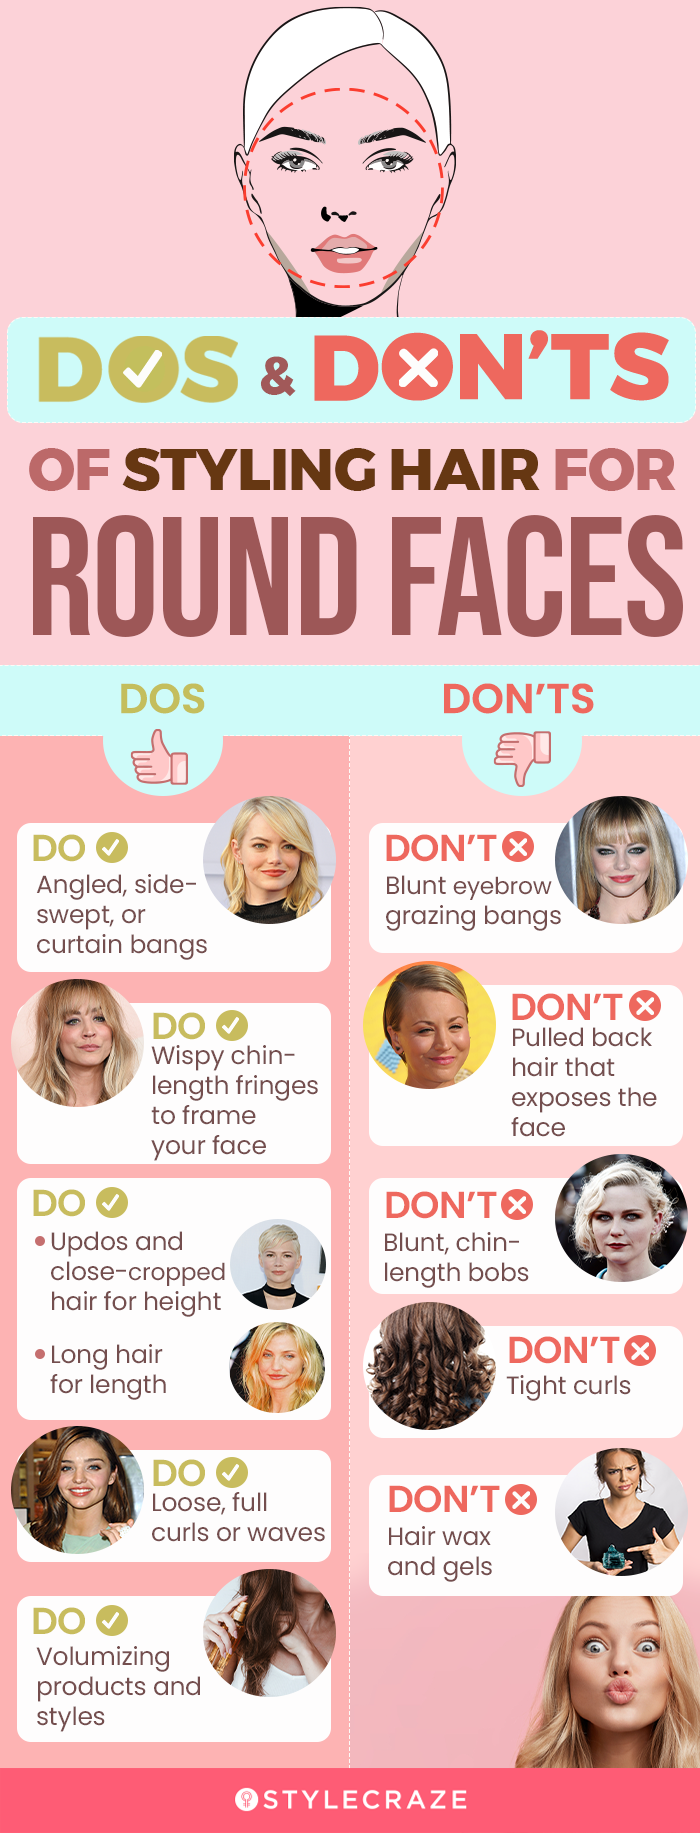 dos & don'ts of styling hair for round faces [infographic]